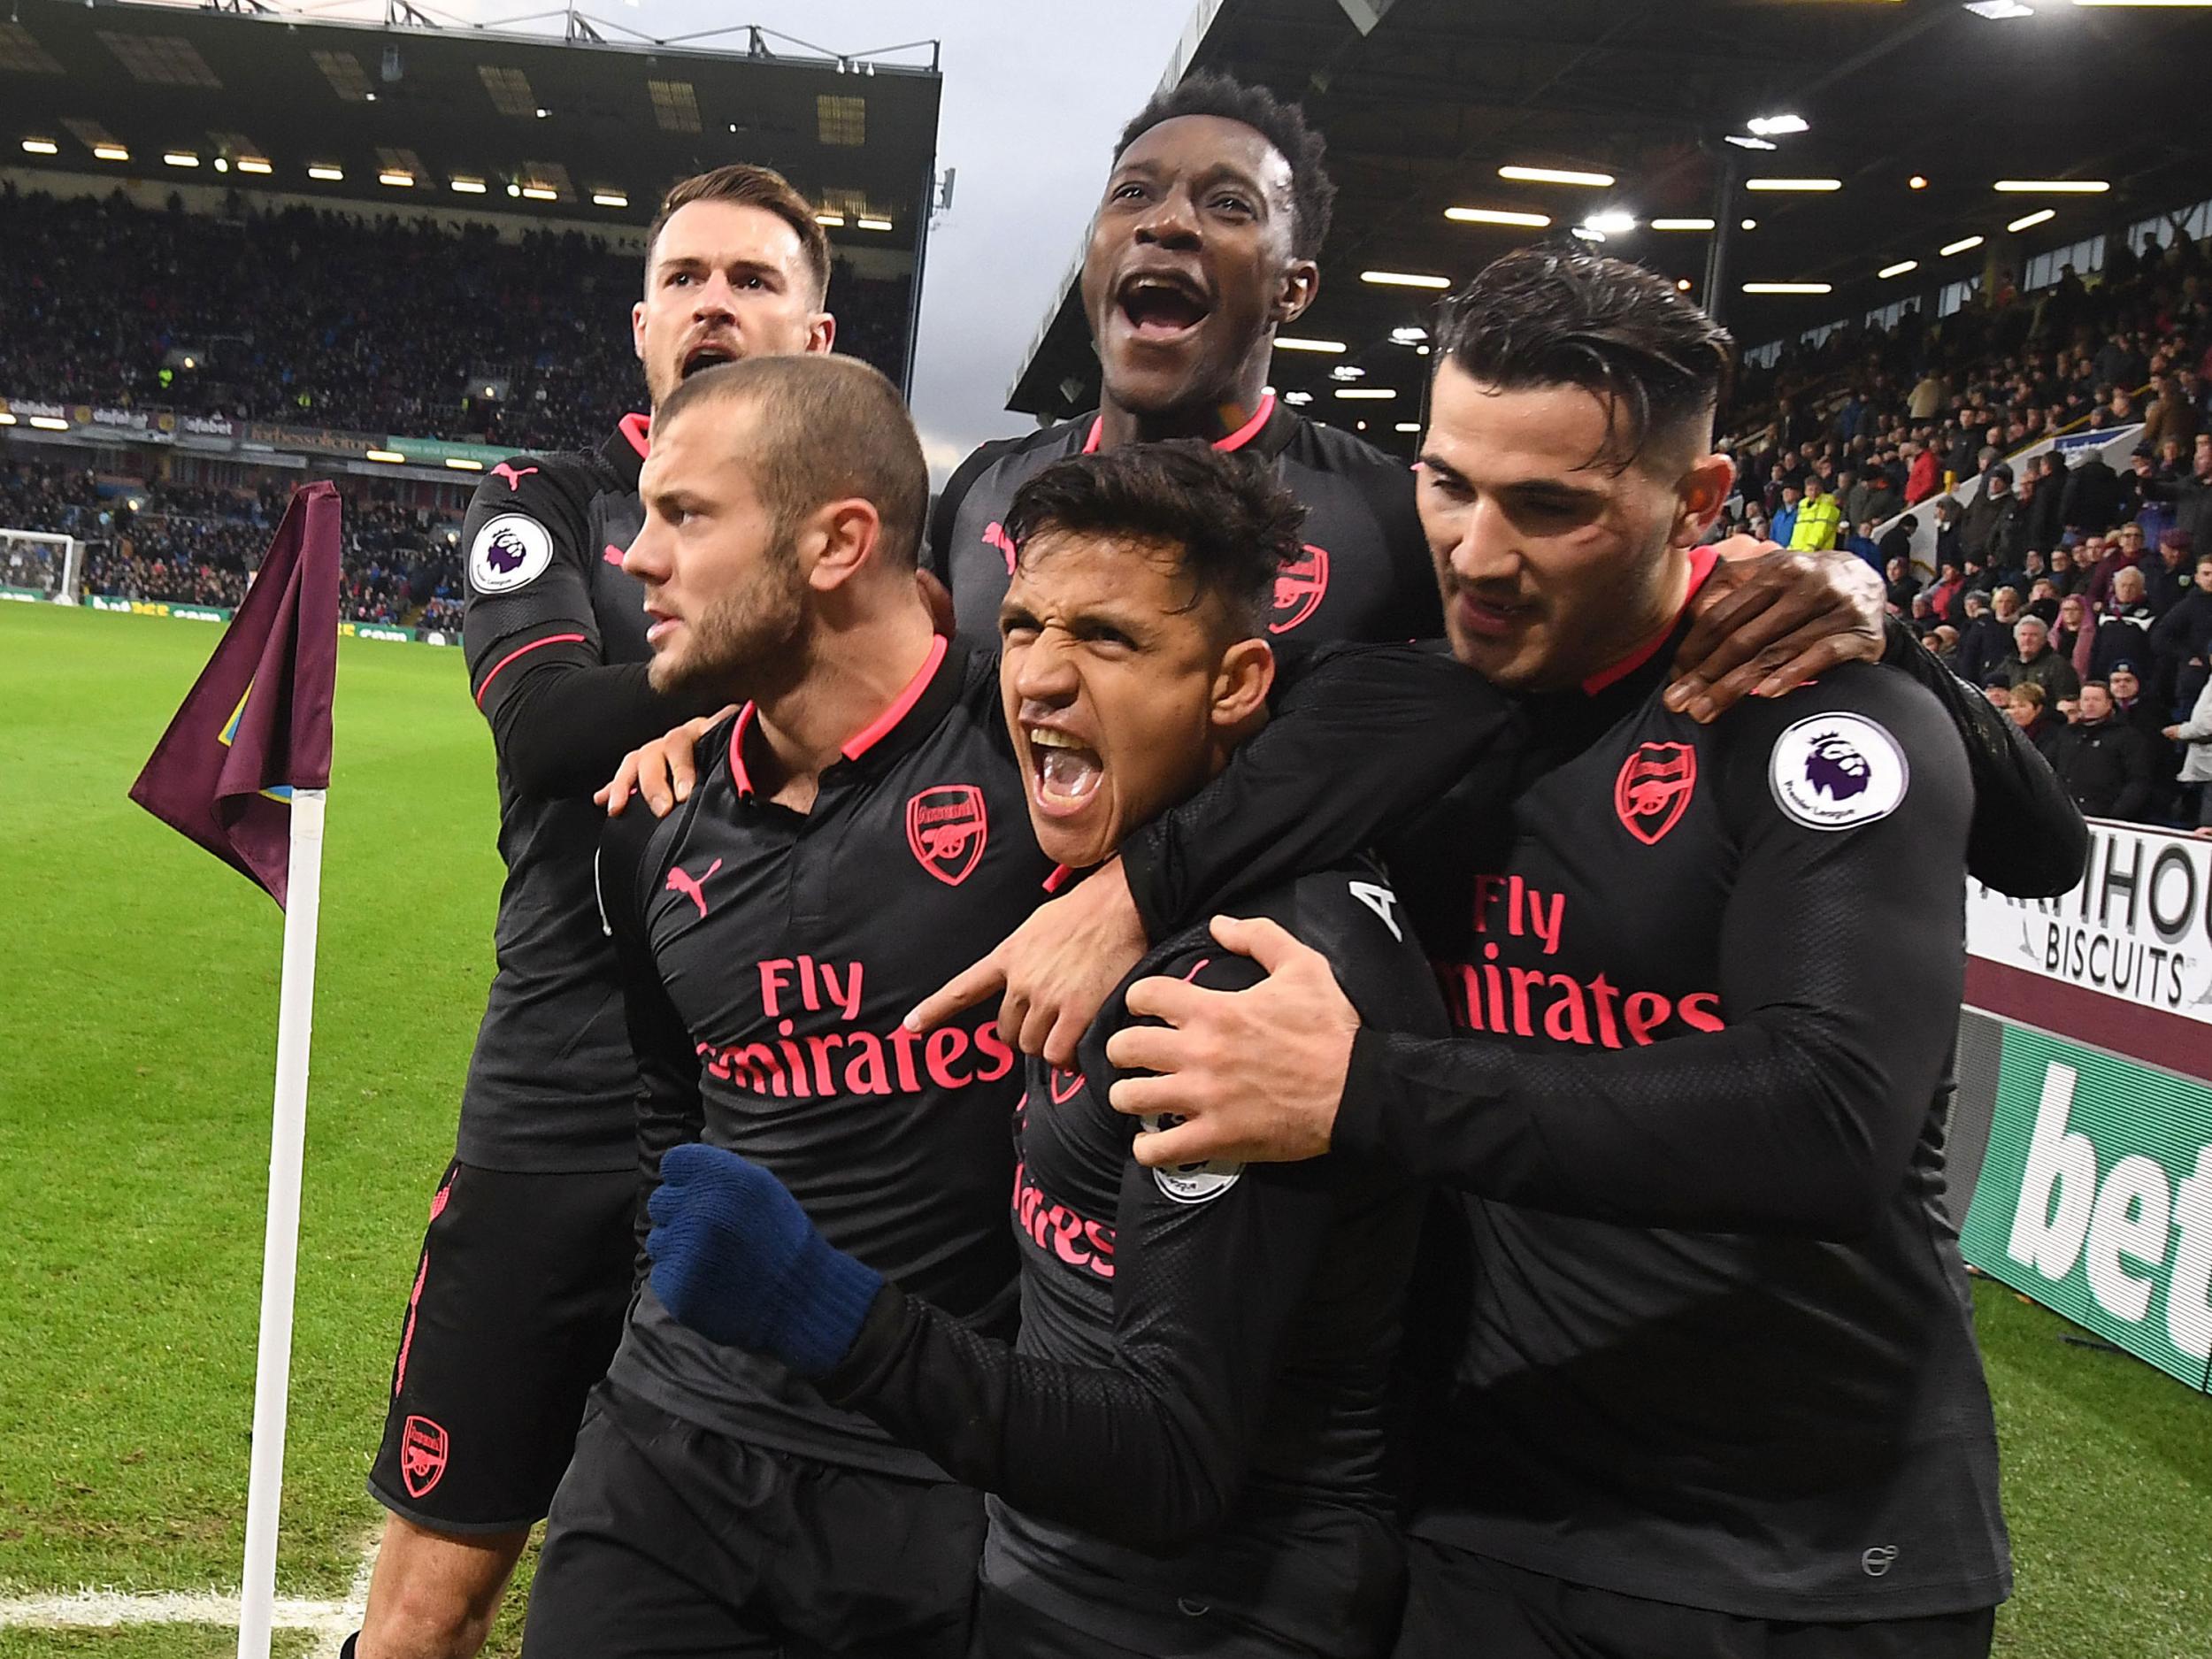 Arsenal deserve credit for the patience they showed against Burnley